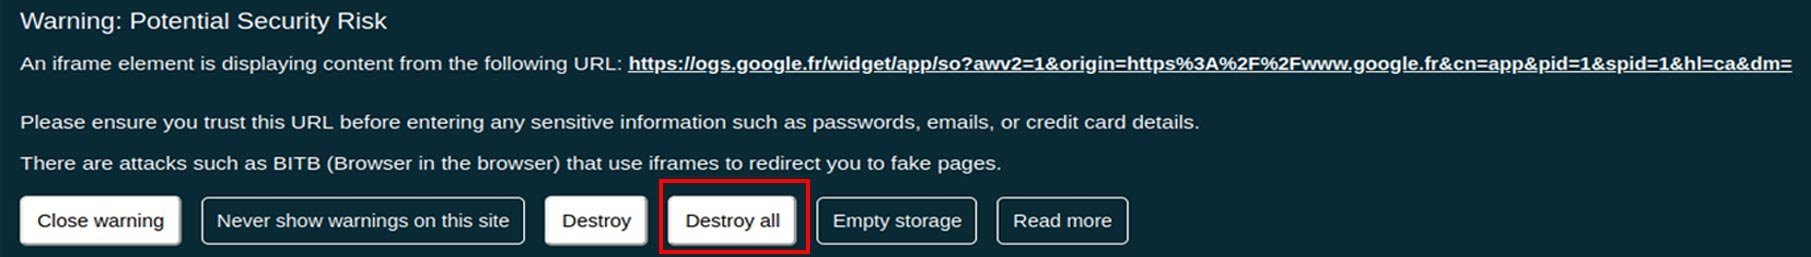 EviBITB destroy manual all ifram warning potential security risk BITB protection close warning nevers show warning on the site destroy iframe empty storage web navigator read more by Freemindtronic